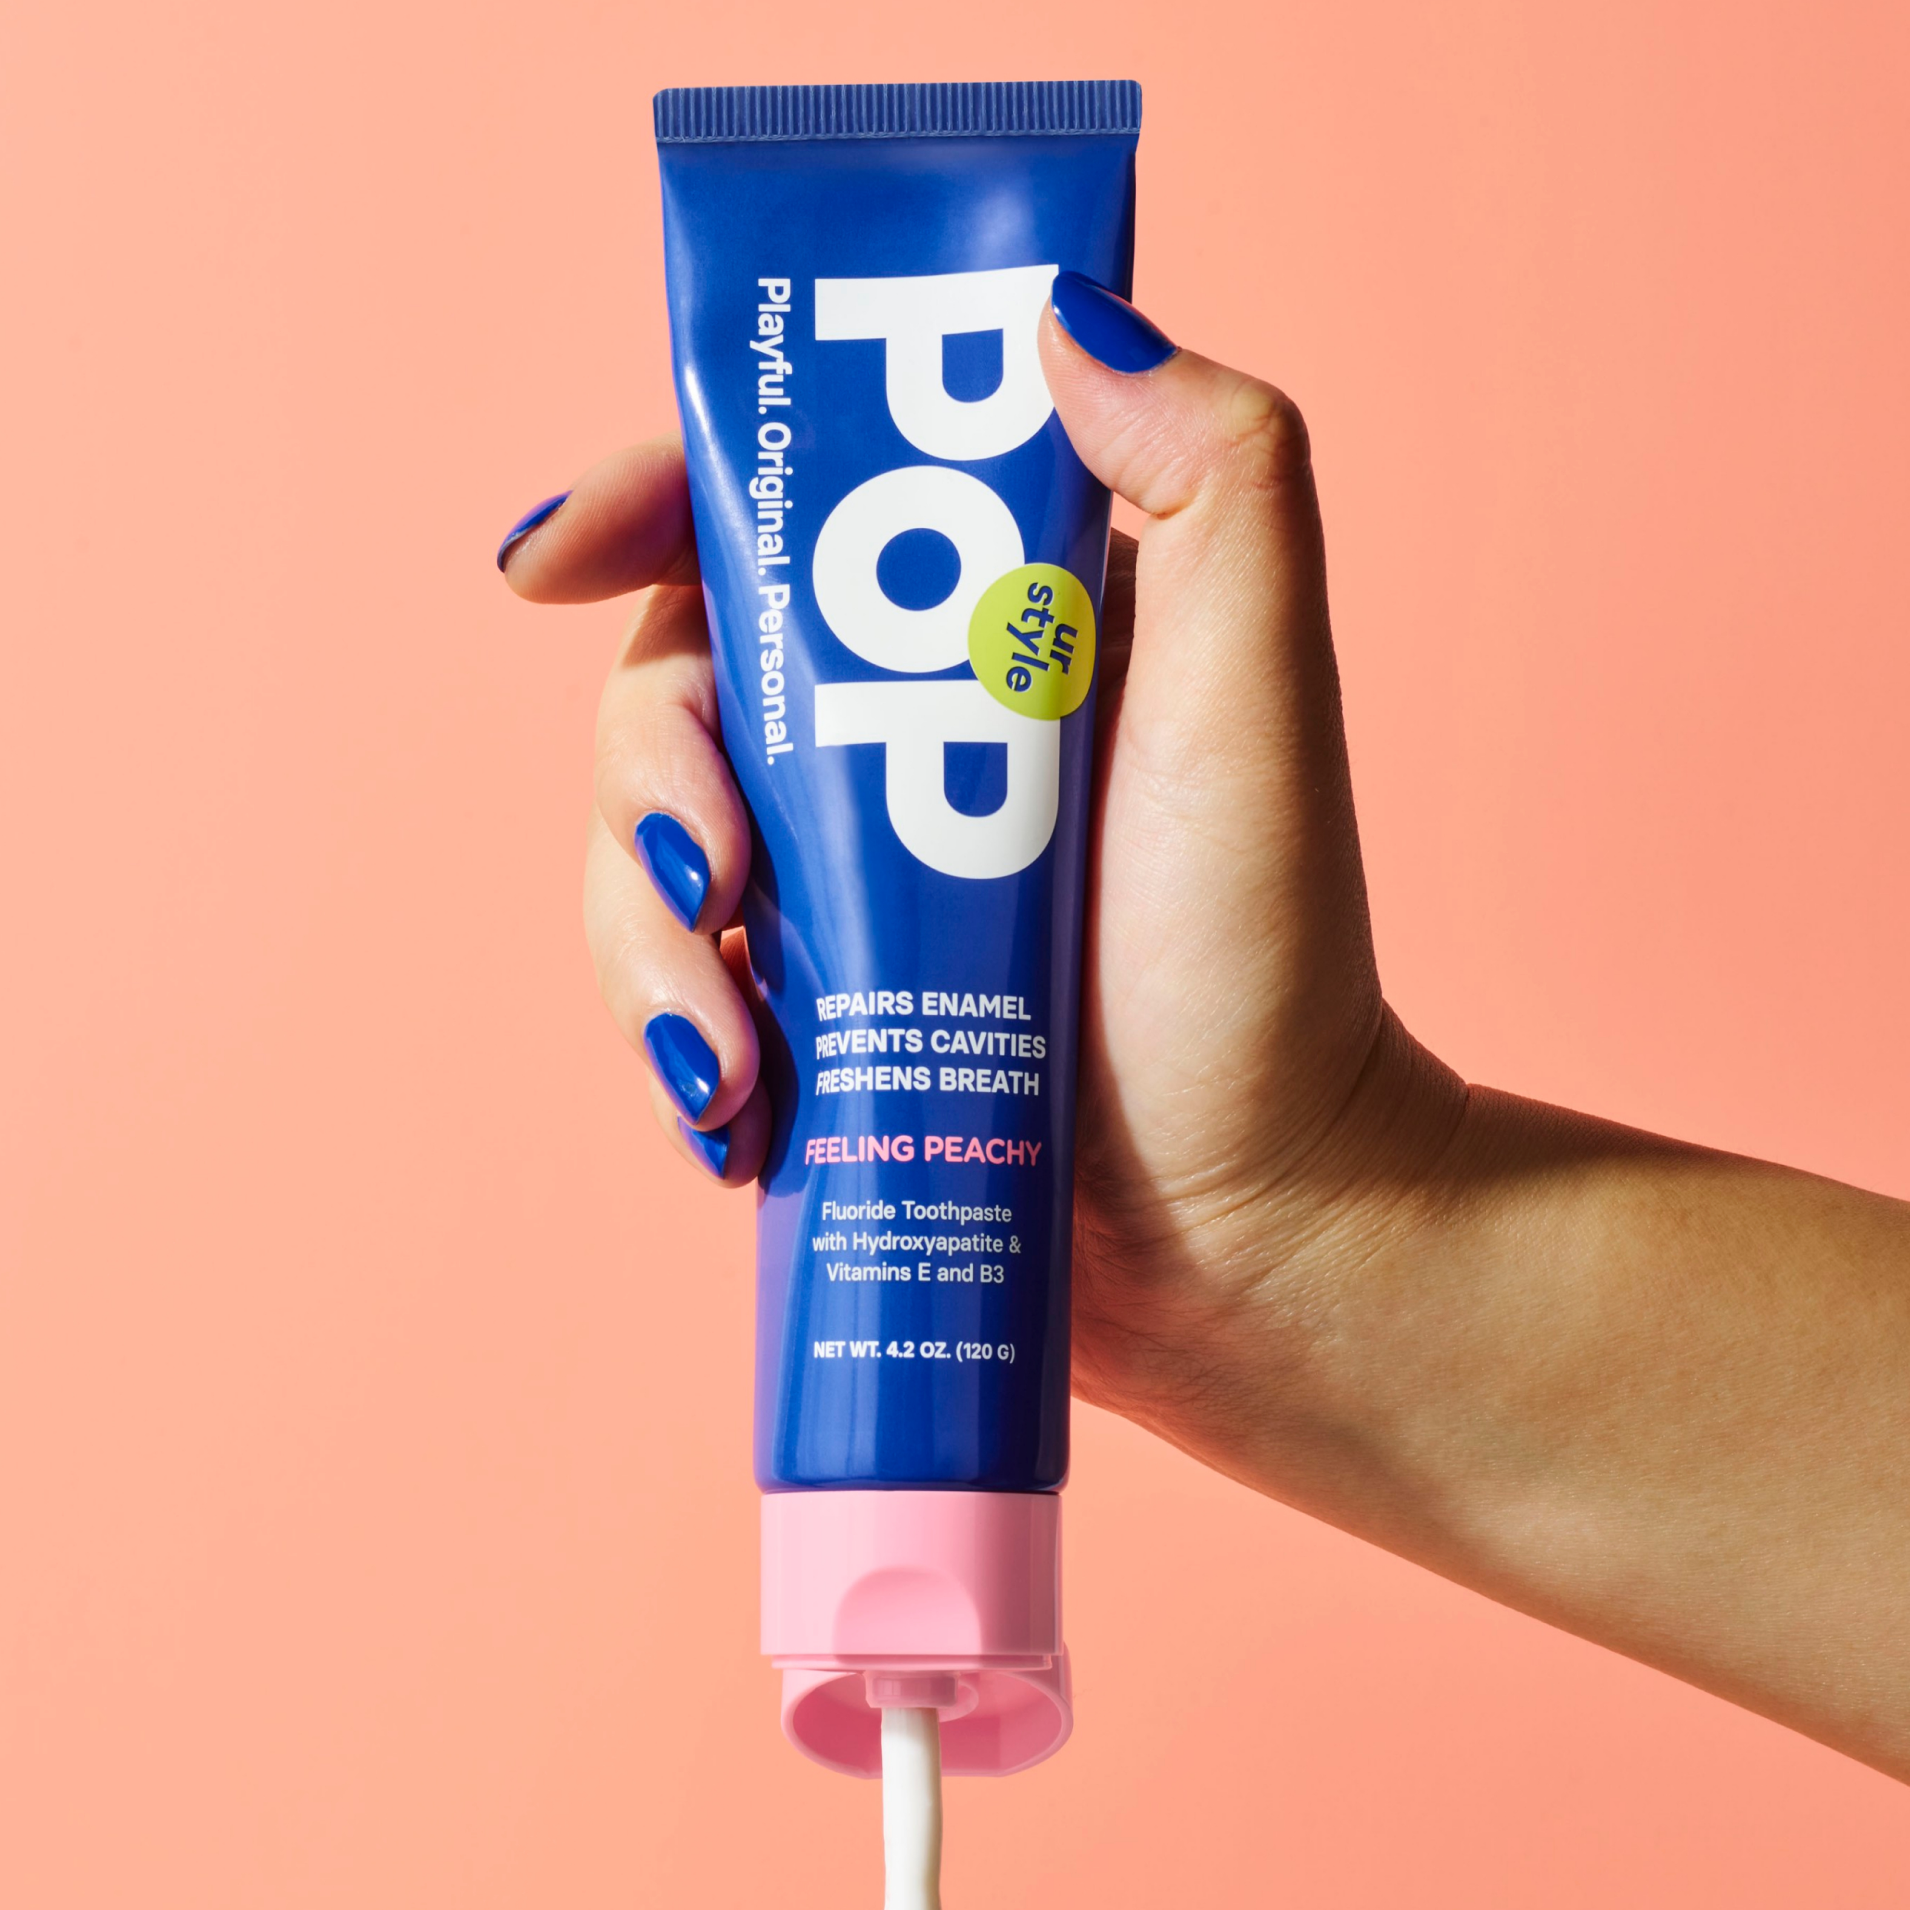 A hand with blue-painted nails holding a blue tube of POP Feeling Peachy Toothpaste with a pink cap on a peach surface